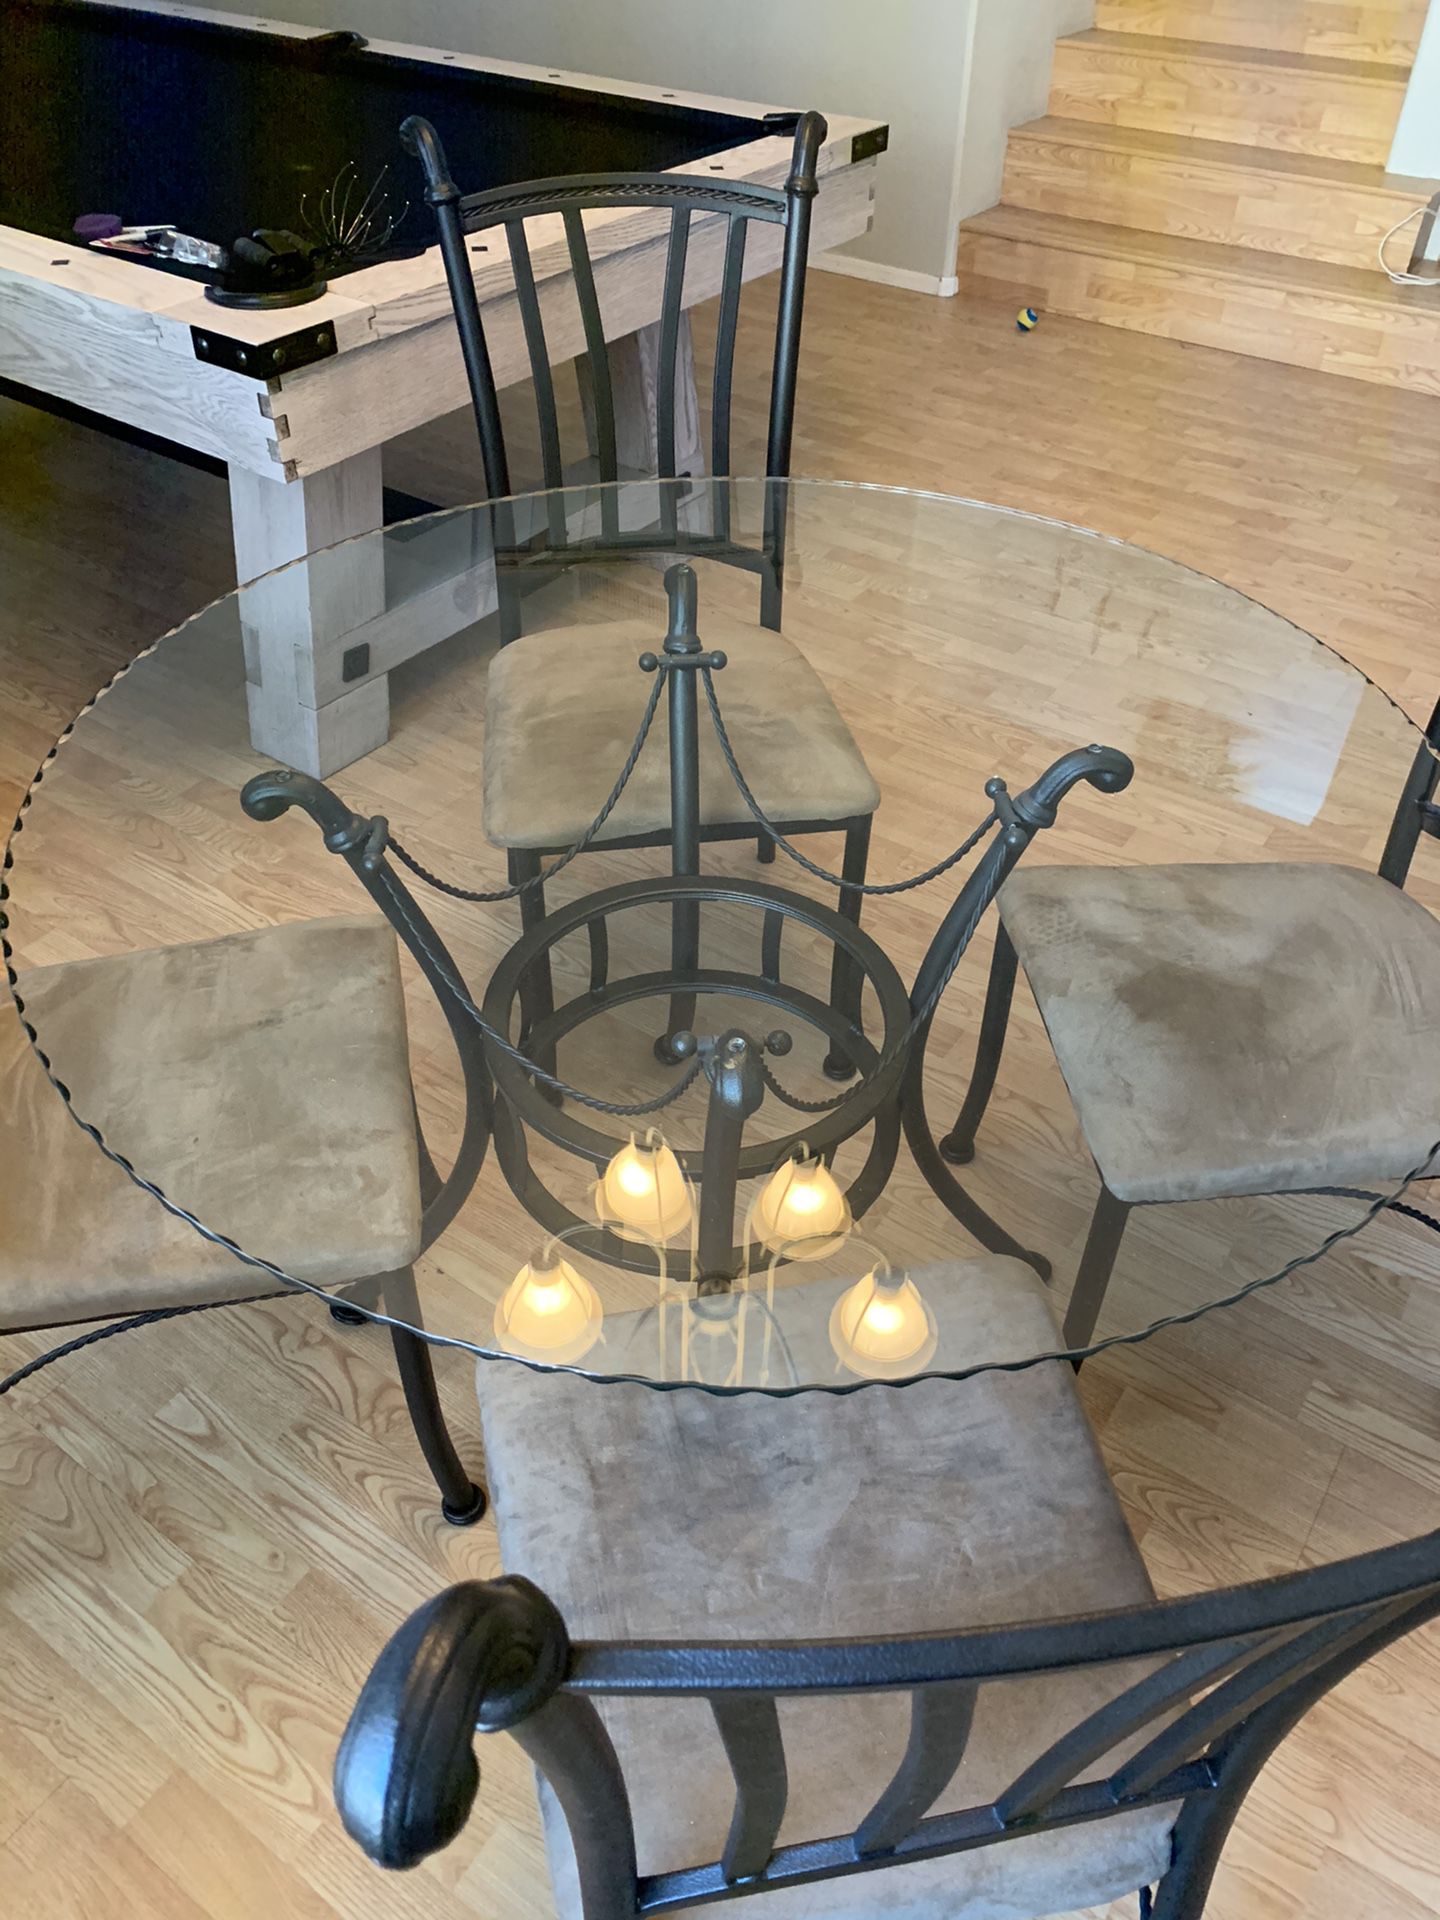 Round glass table with chairs